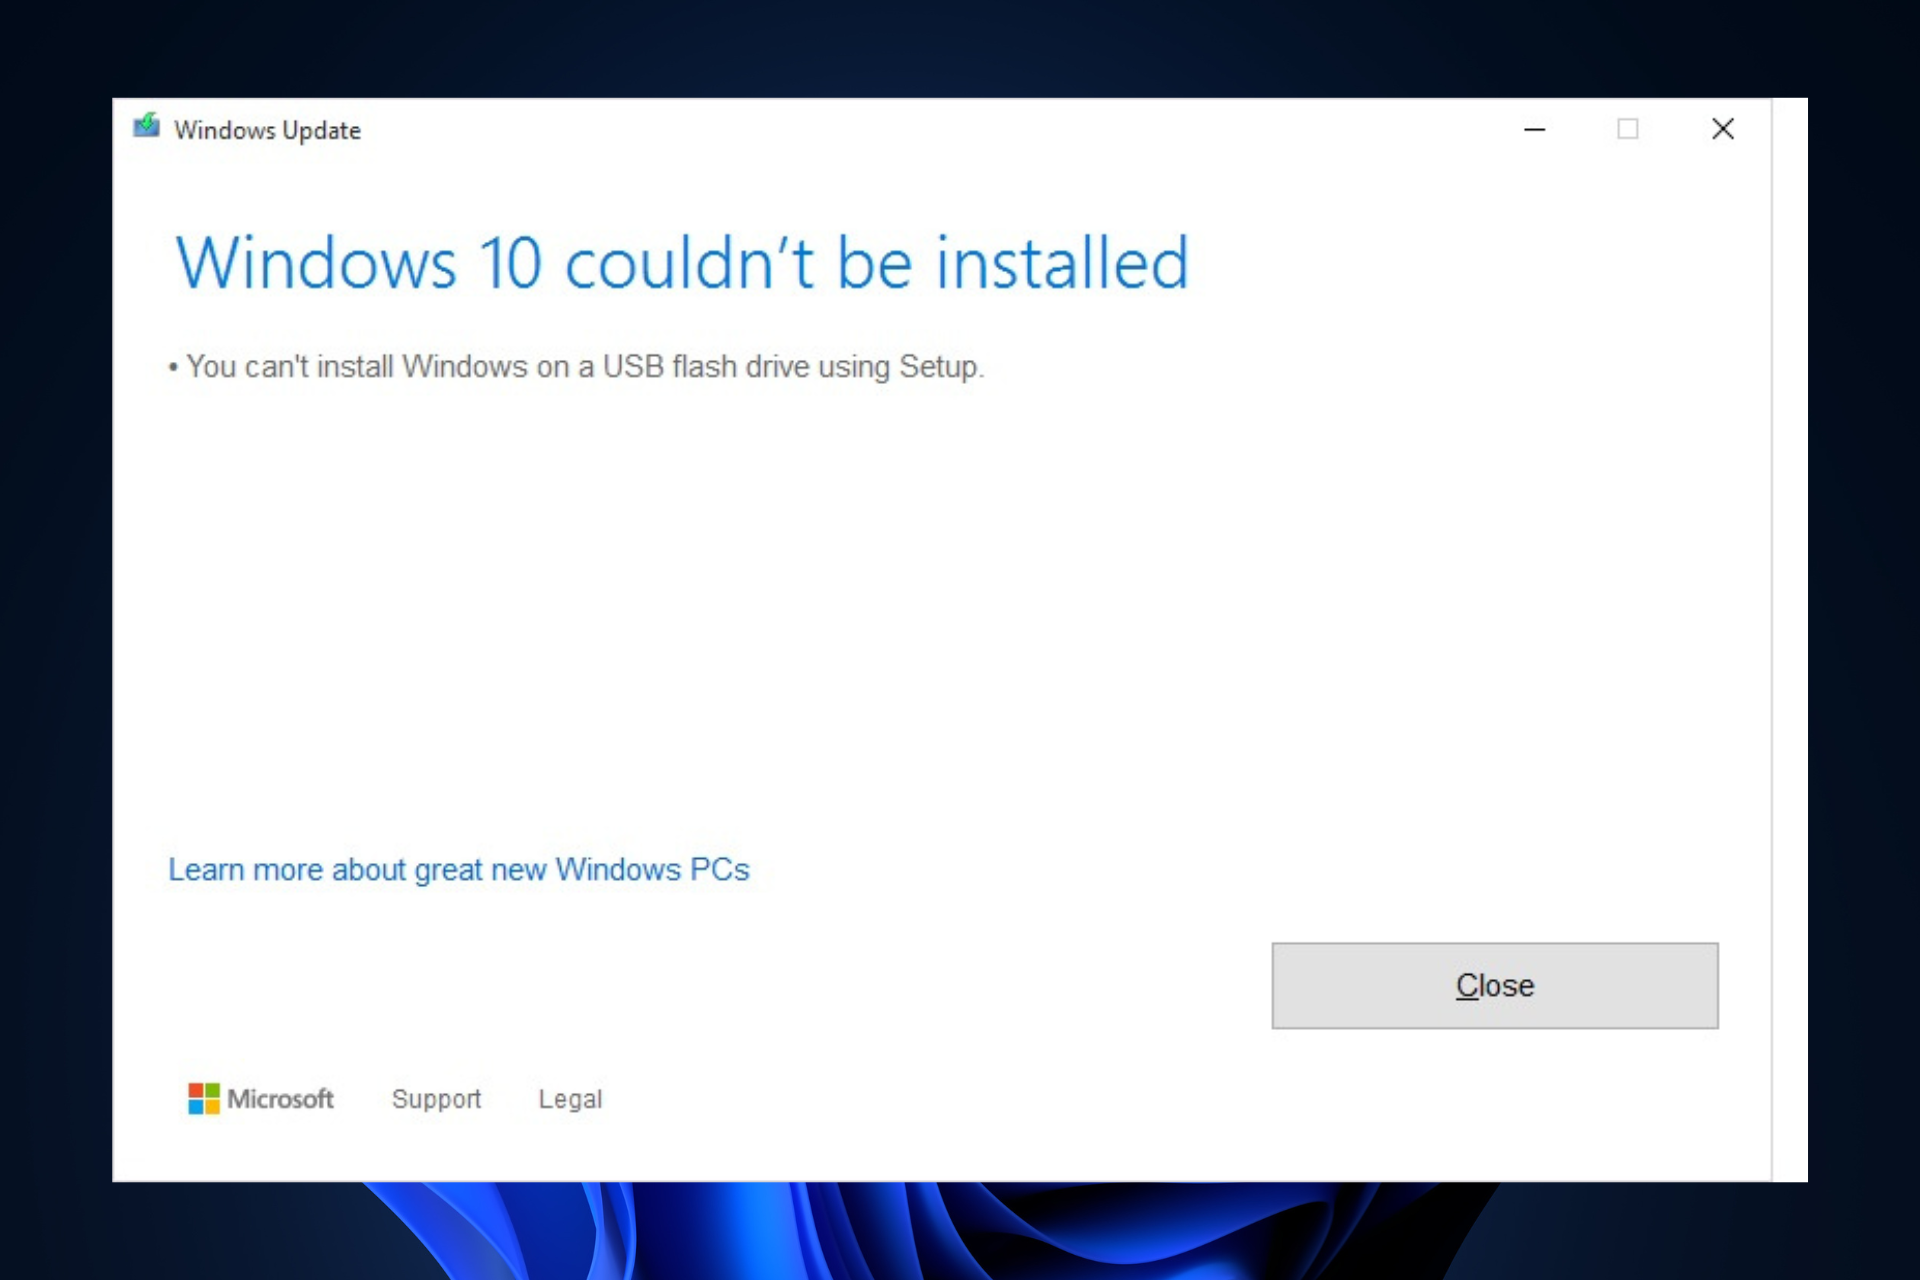 you can't install Windows on a USB flash drive using setup